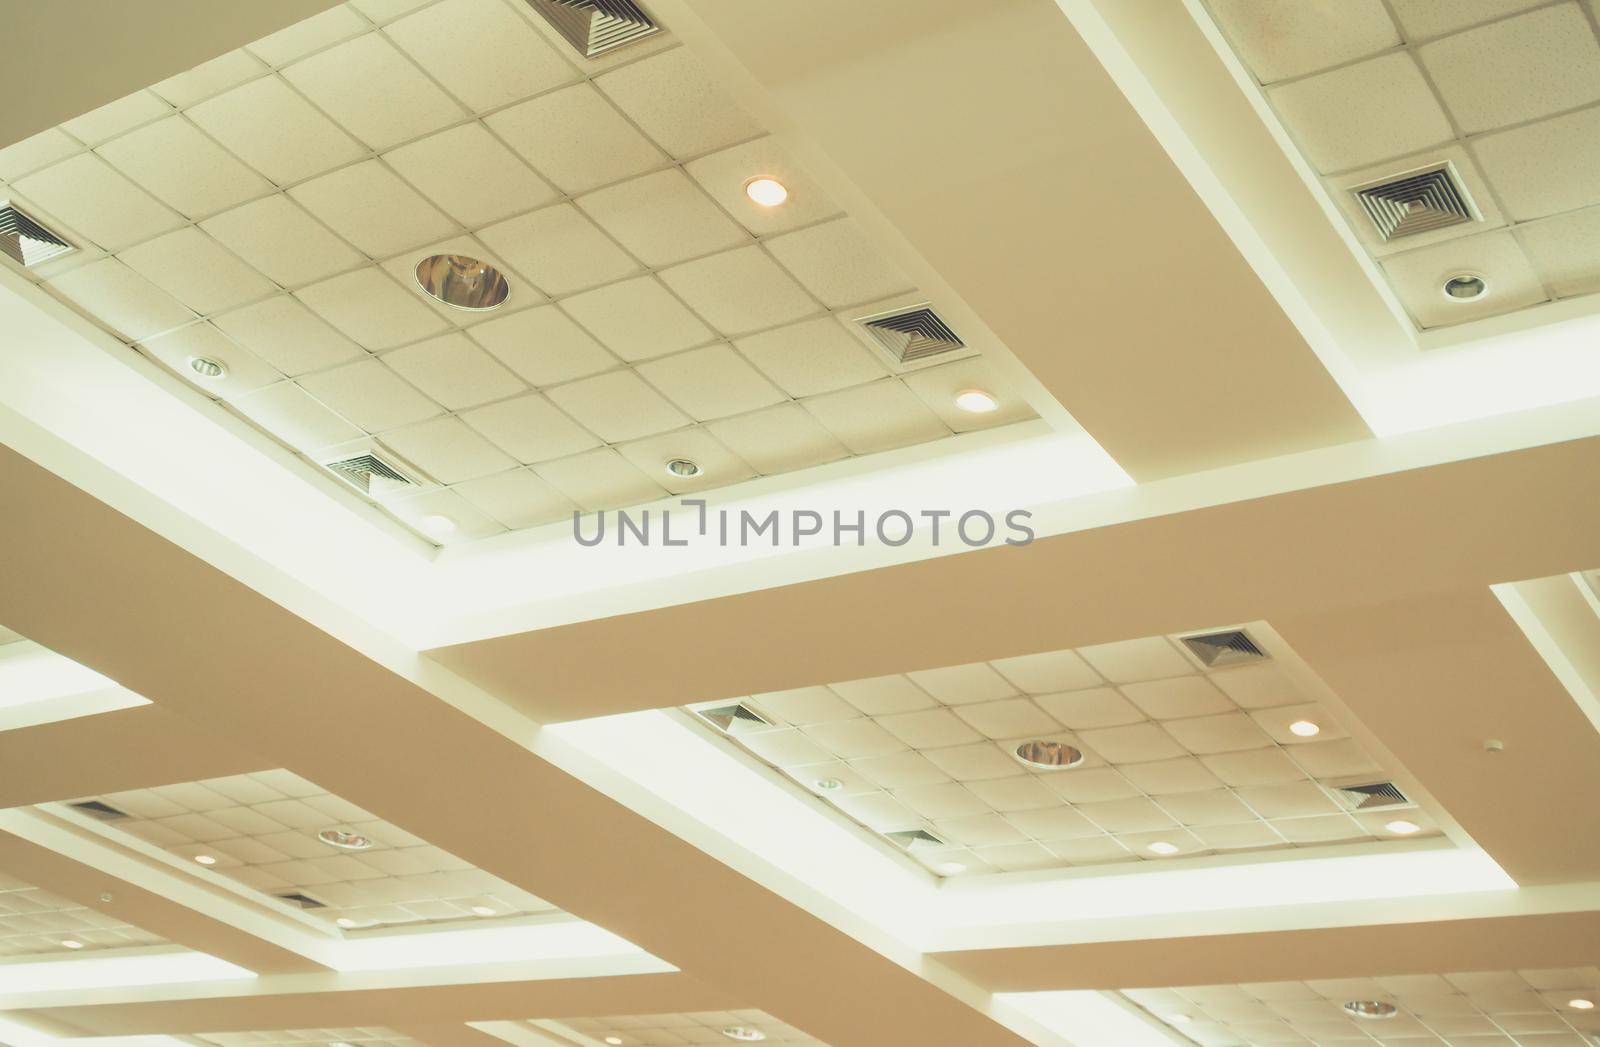 ceiling of business interior office building and light neon. vintage style tone with copy space add text